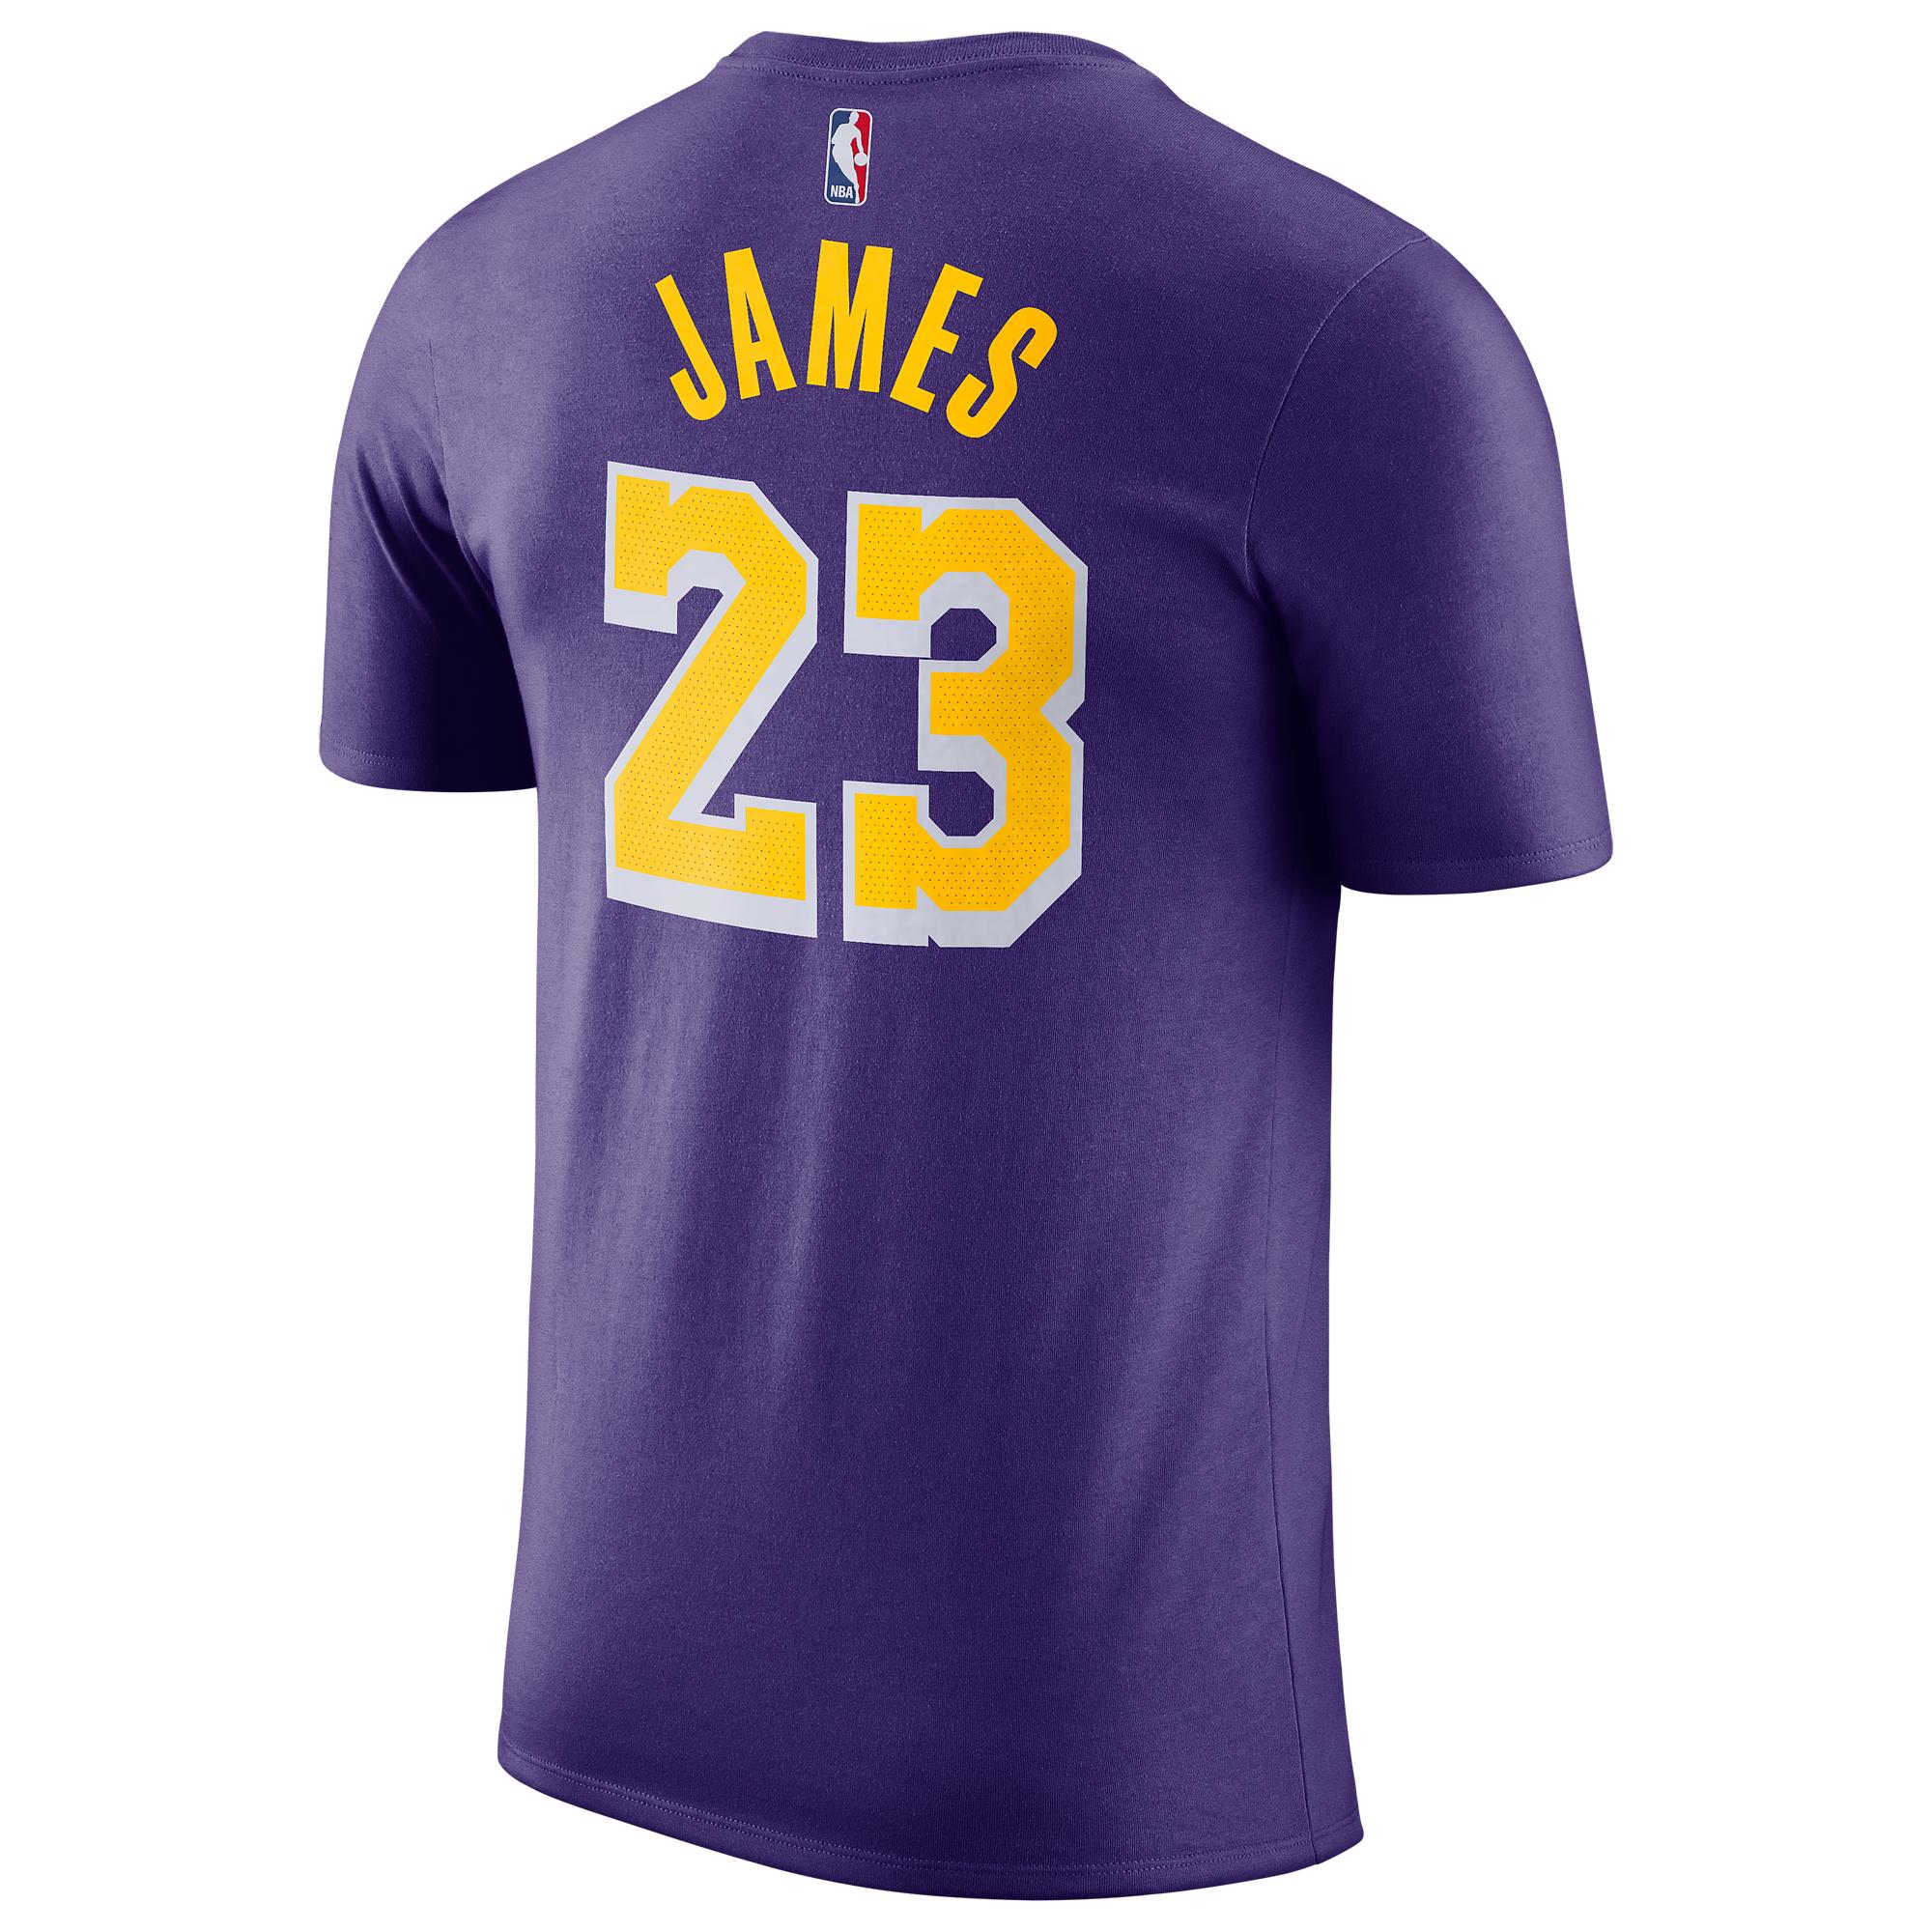 Nike Lebron James Nba Player Name & Number T-shirt in Purple for Men - Lyst